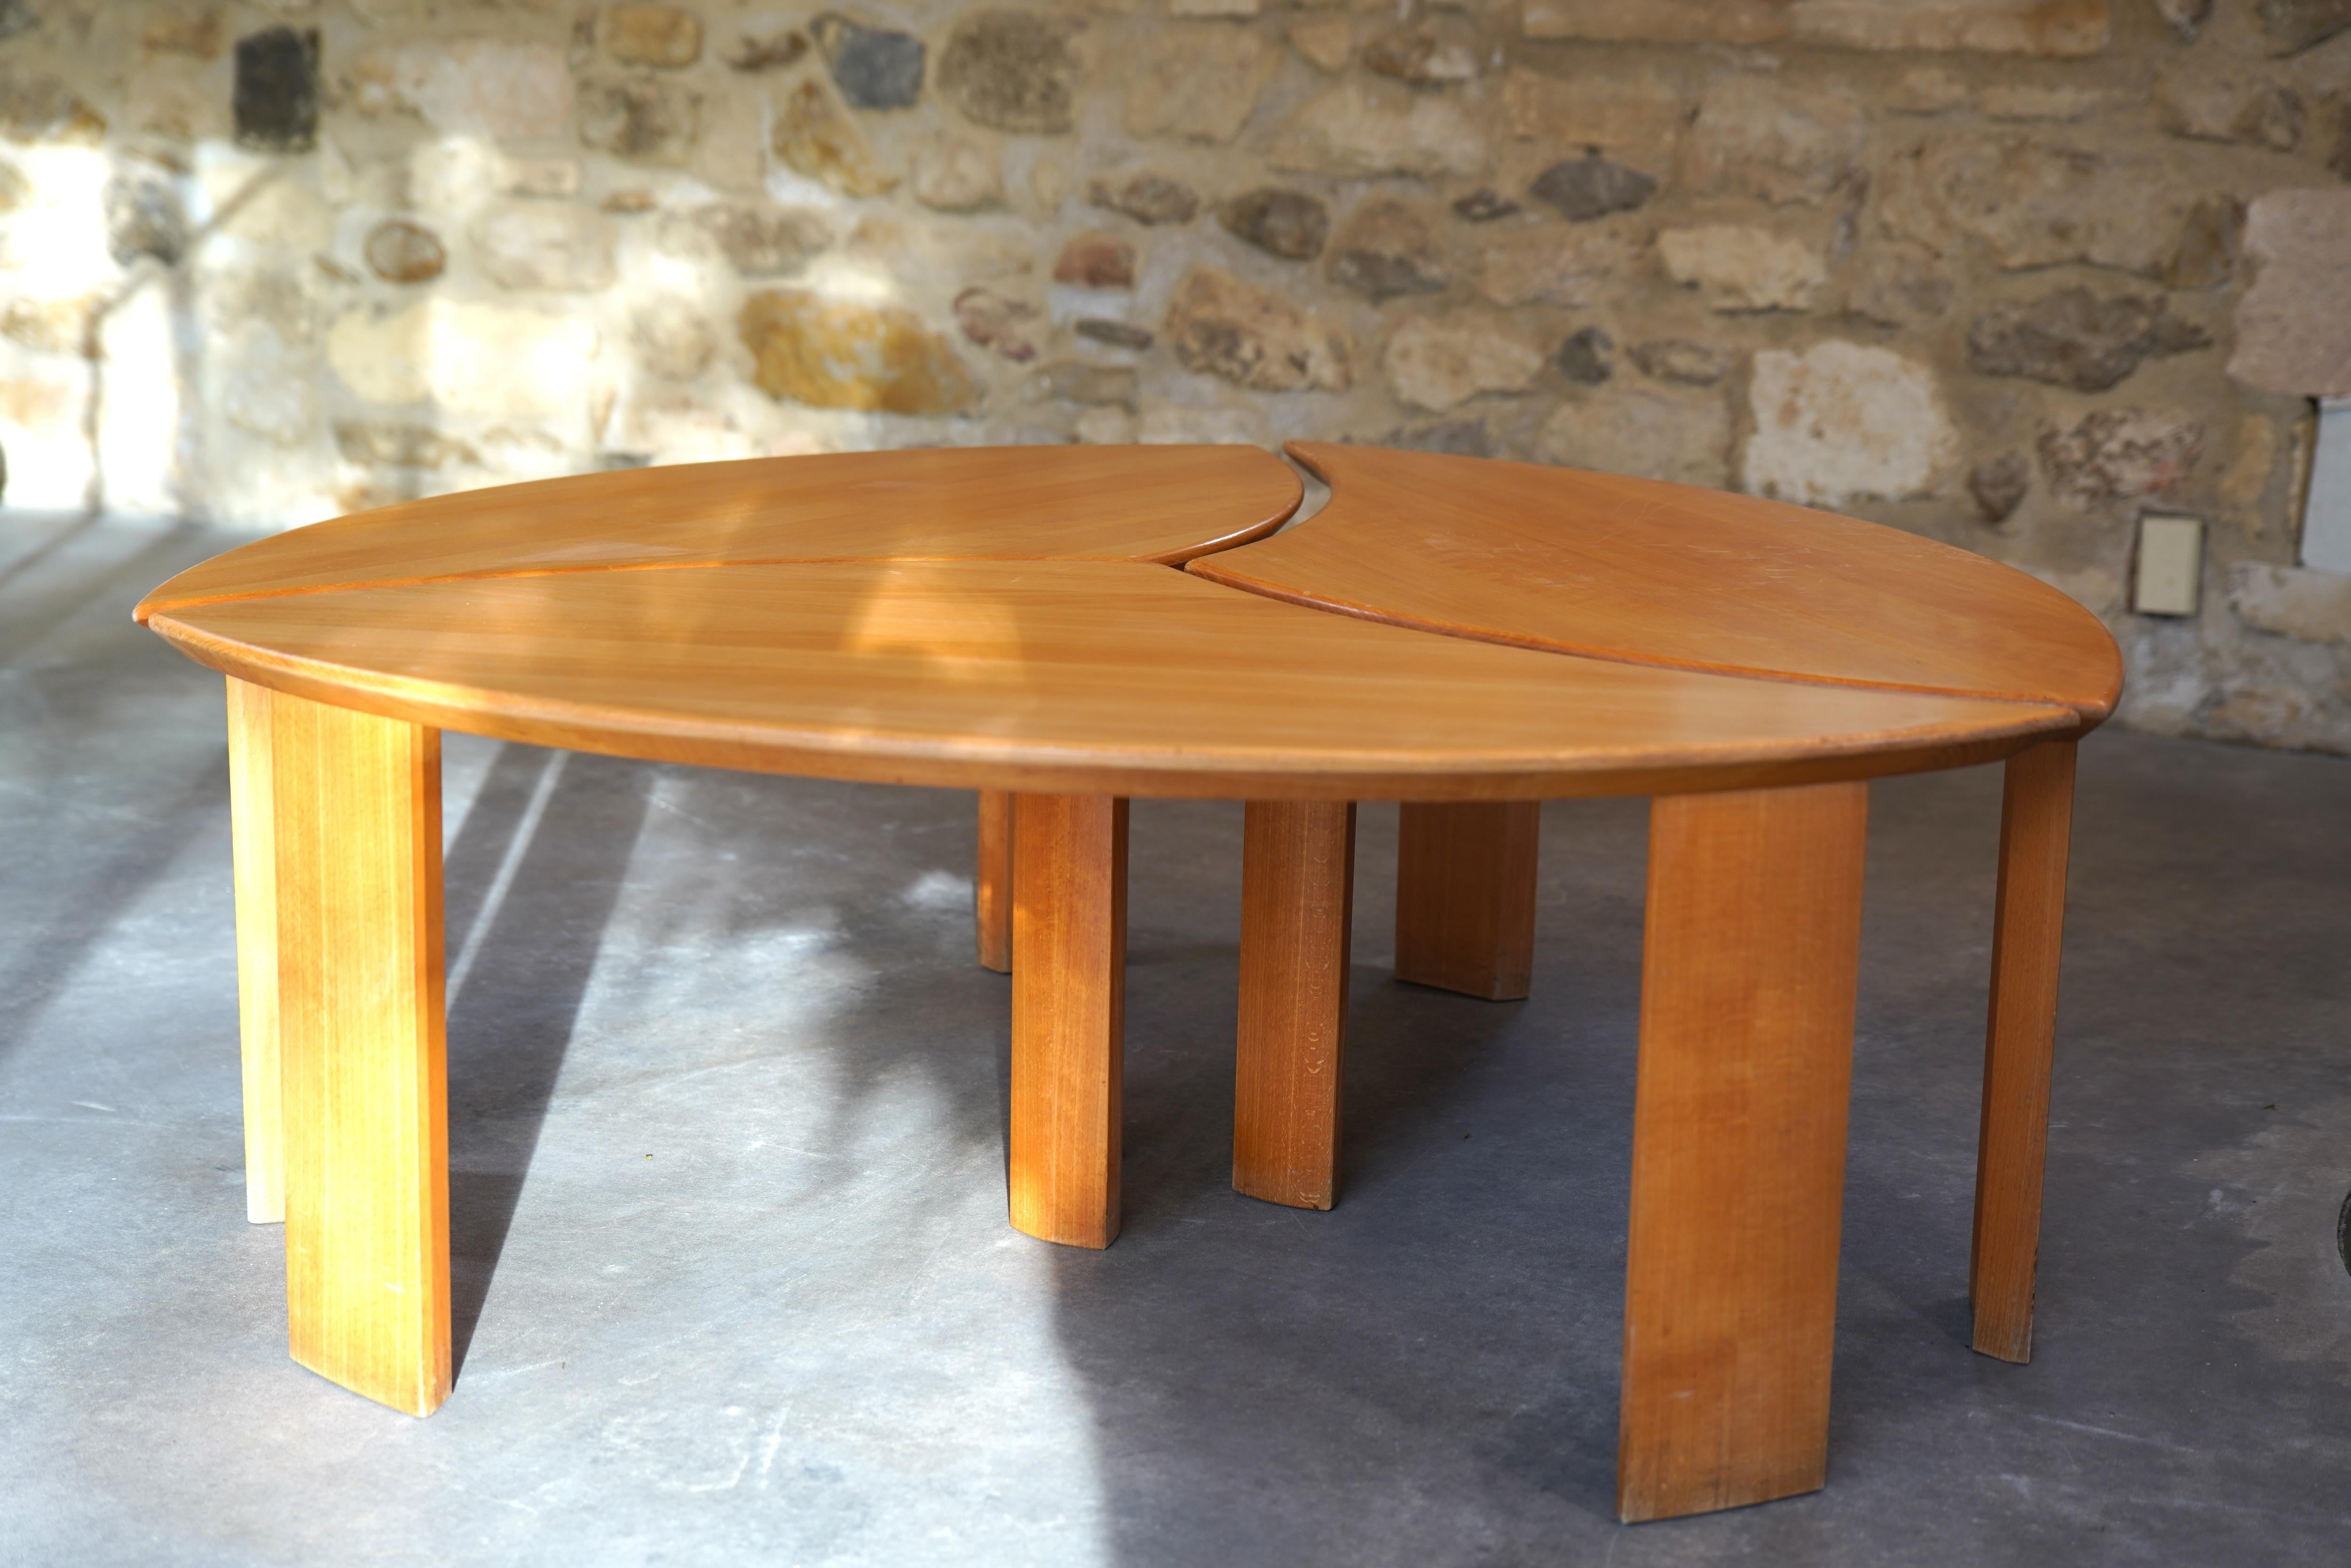 Made entirely of elm, this exceptionally rare 'petal' coffee table shows all the know-how of French Seltz cabinetmaking.

Active in the world of elitist cabinetmaking since 1930, Seltz unfortunately closed its doors in 2016, leaving behind a history